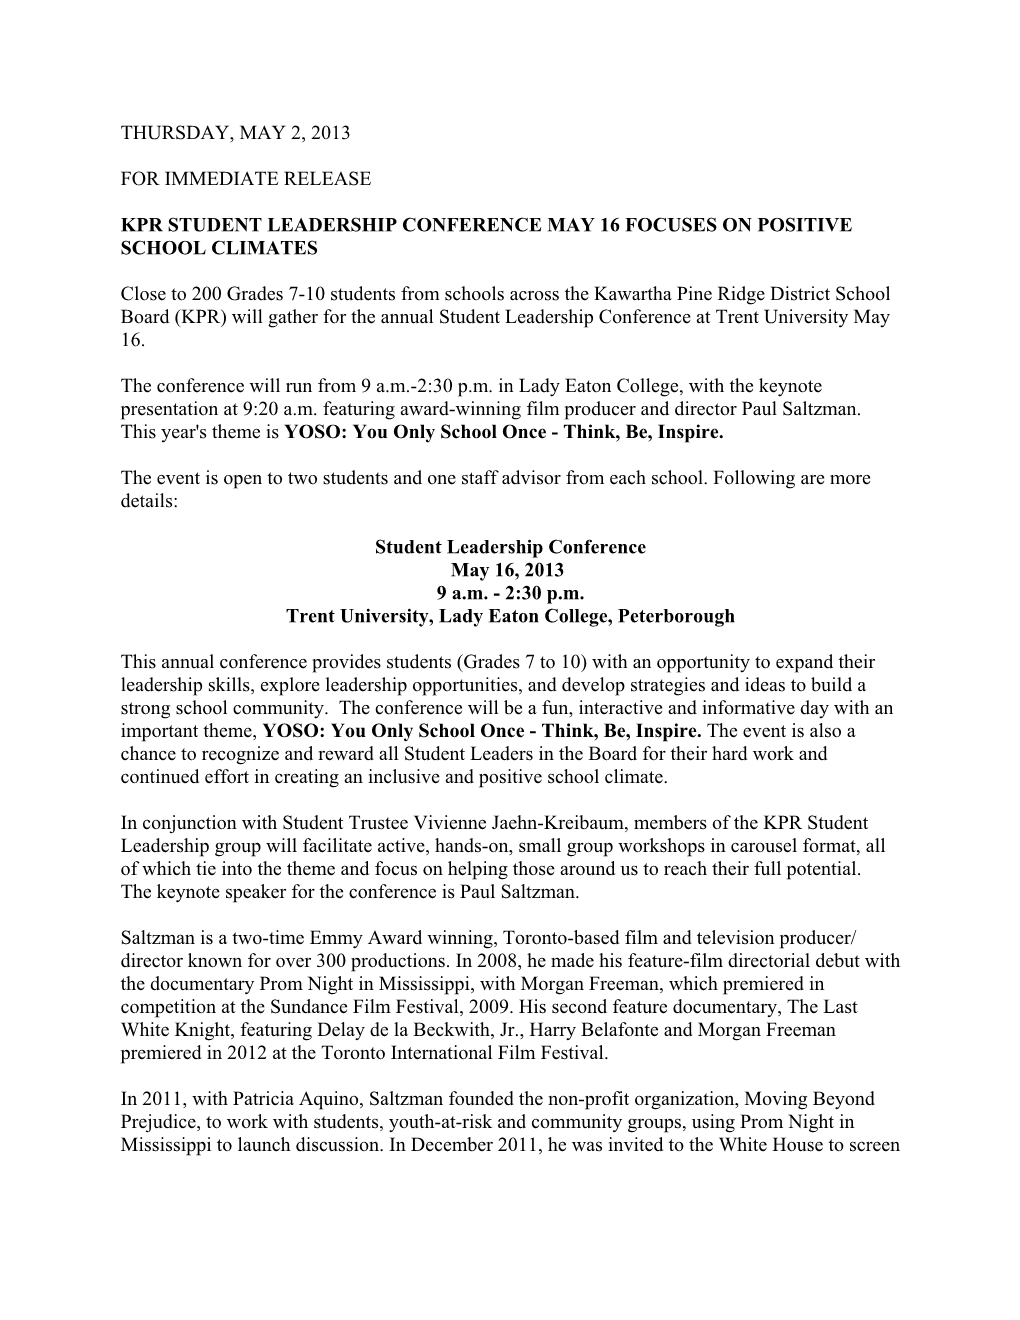 THURSDAY, MAY 2, 2013 for IMMEDIATE RELEASE KPR STUDENT LEADERSHIP CONFERENCE MAY 16 FOCUSES on POSITIVE SCHOOL CLIMATES Close T